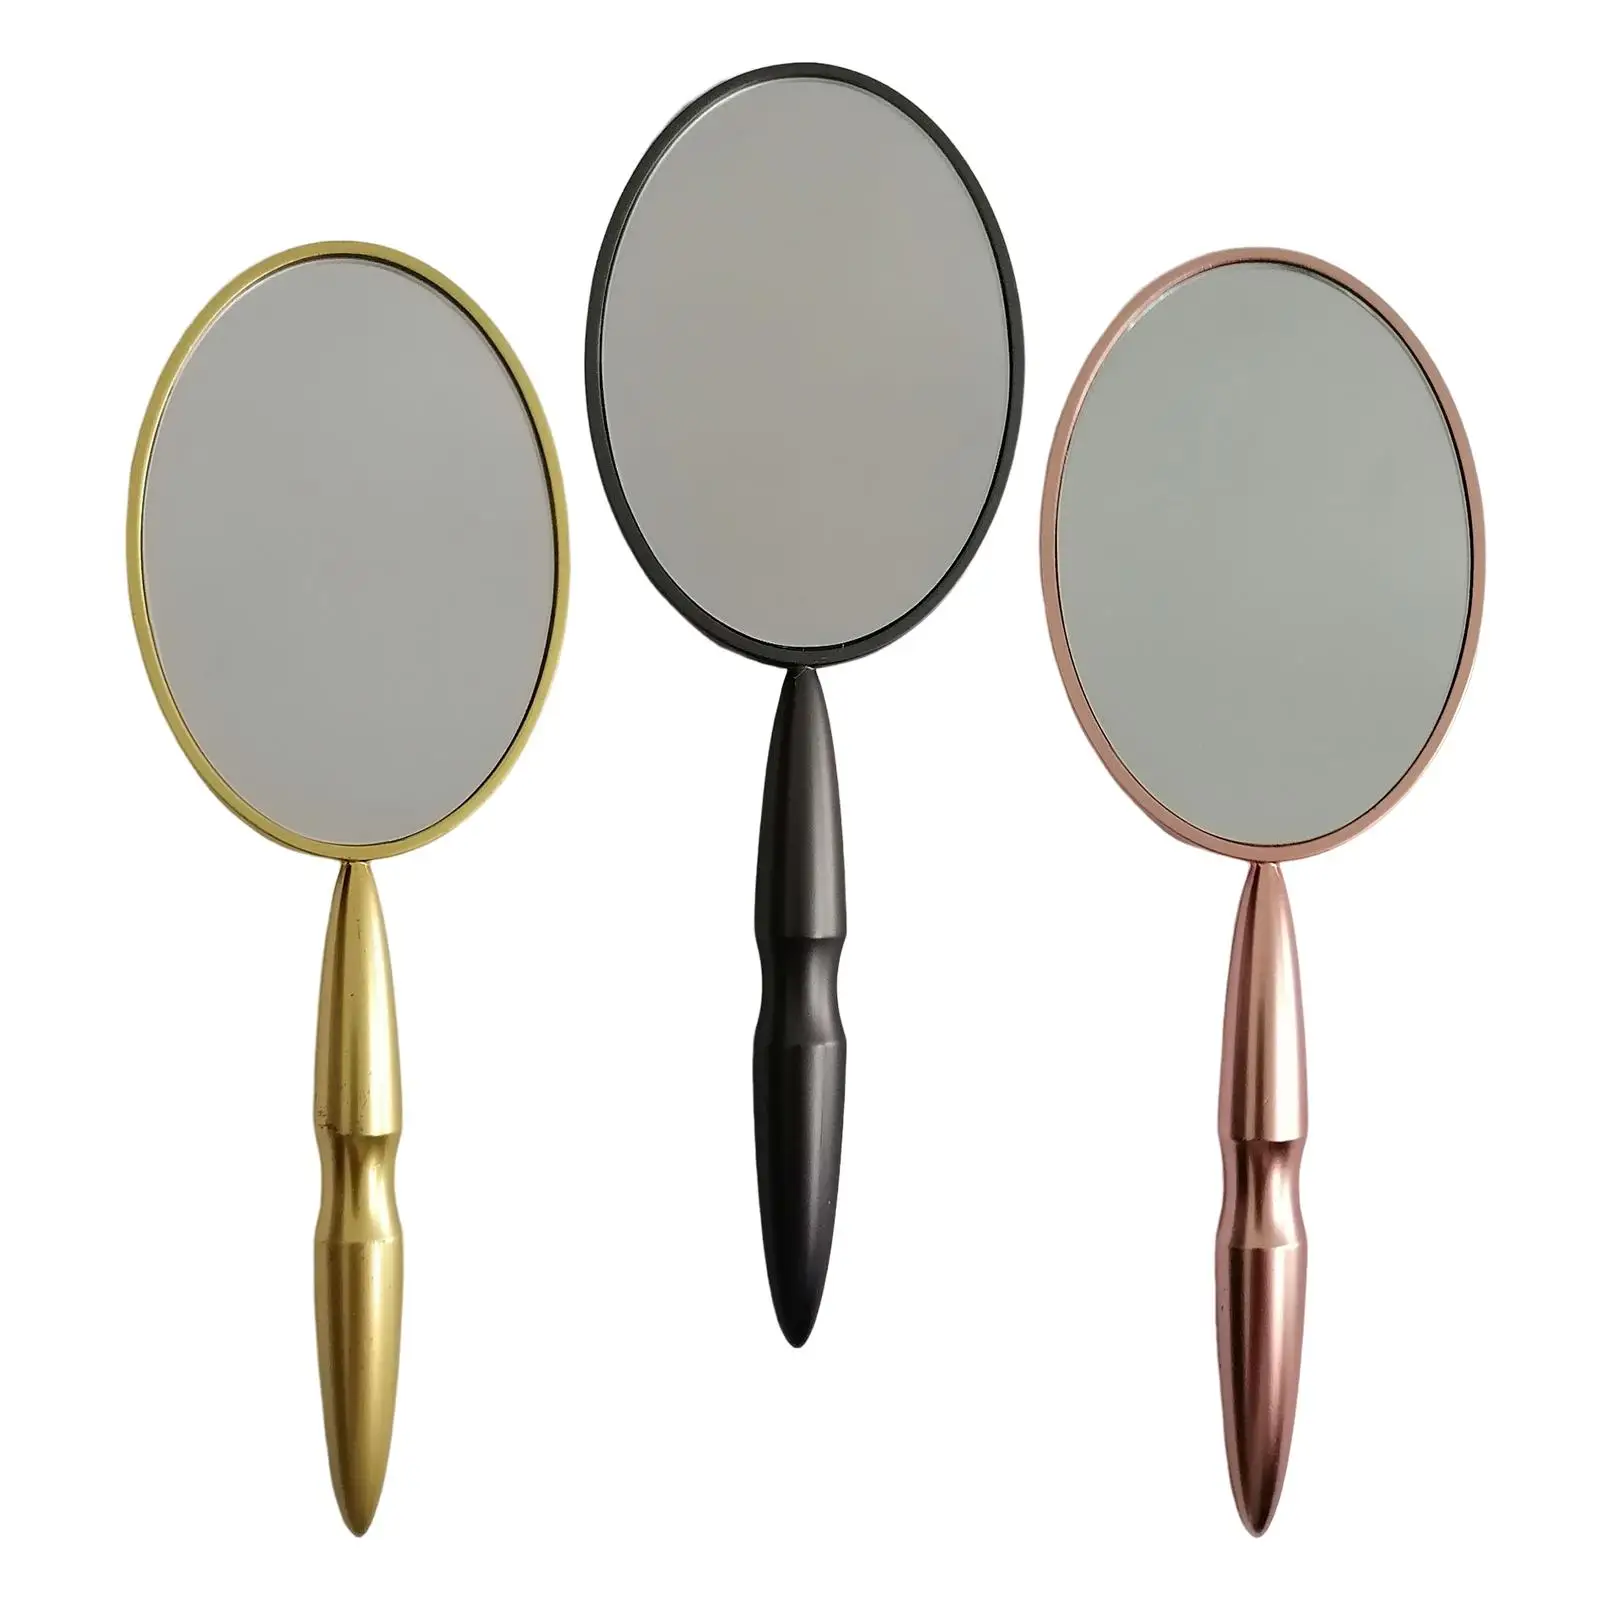 Handheld Mirror with Handle, Compact Mirrors Cosmetic Mirror DIY Makeup Mirror Travel Oval Shape Hand Mirror for Women Girls